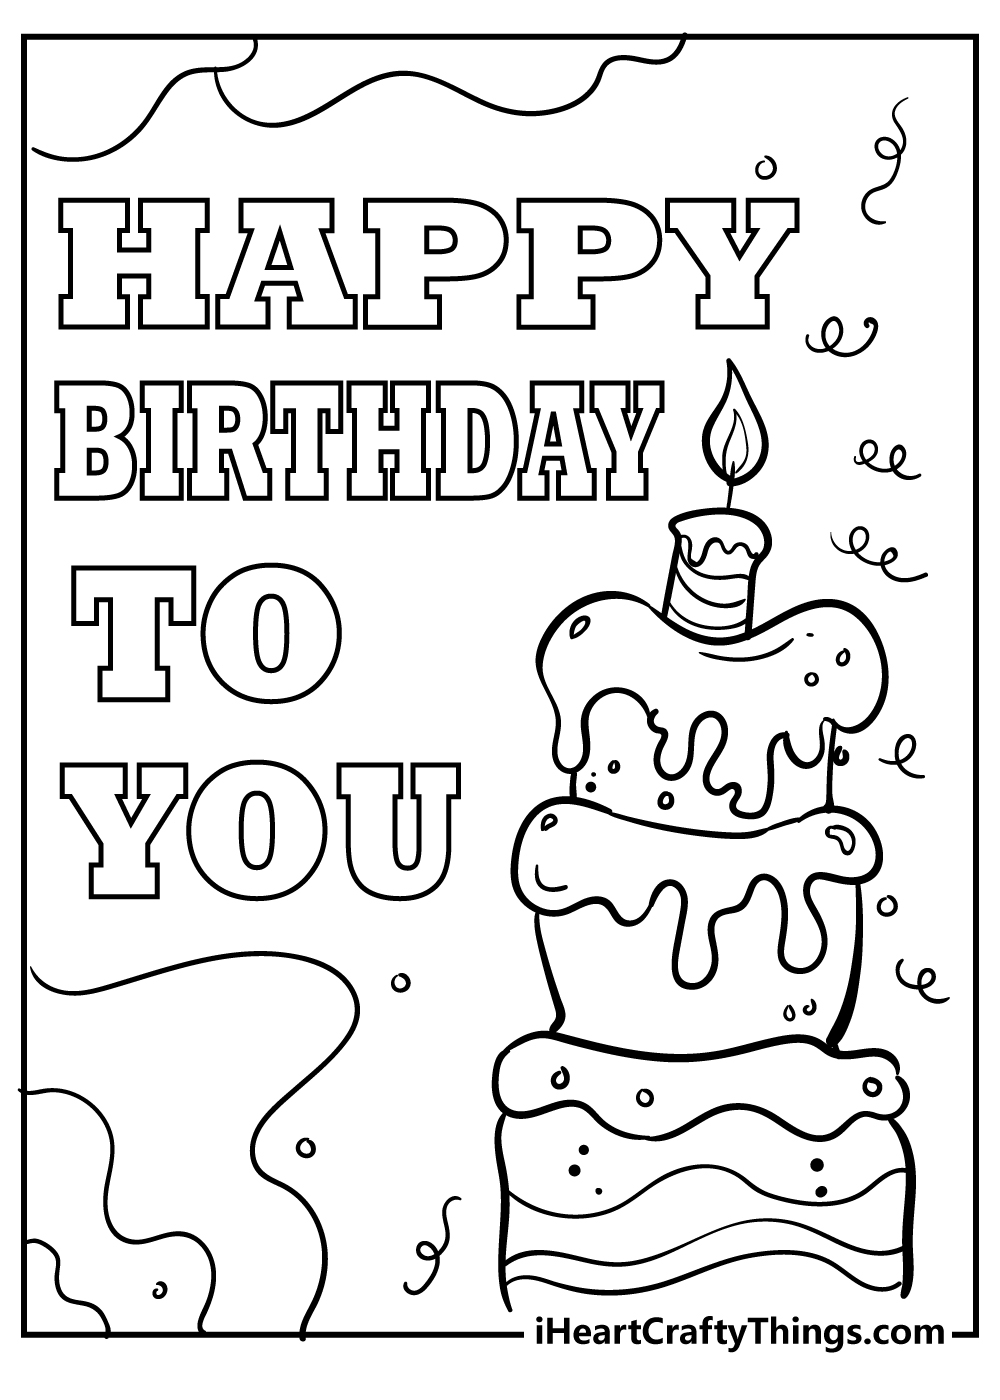 Materials Embellishments Paper Party Kids Coloring Pages For Kids 